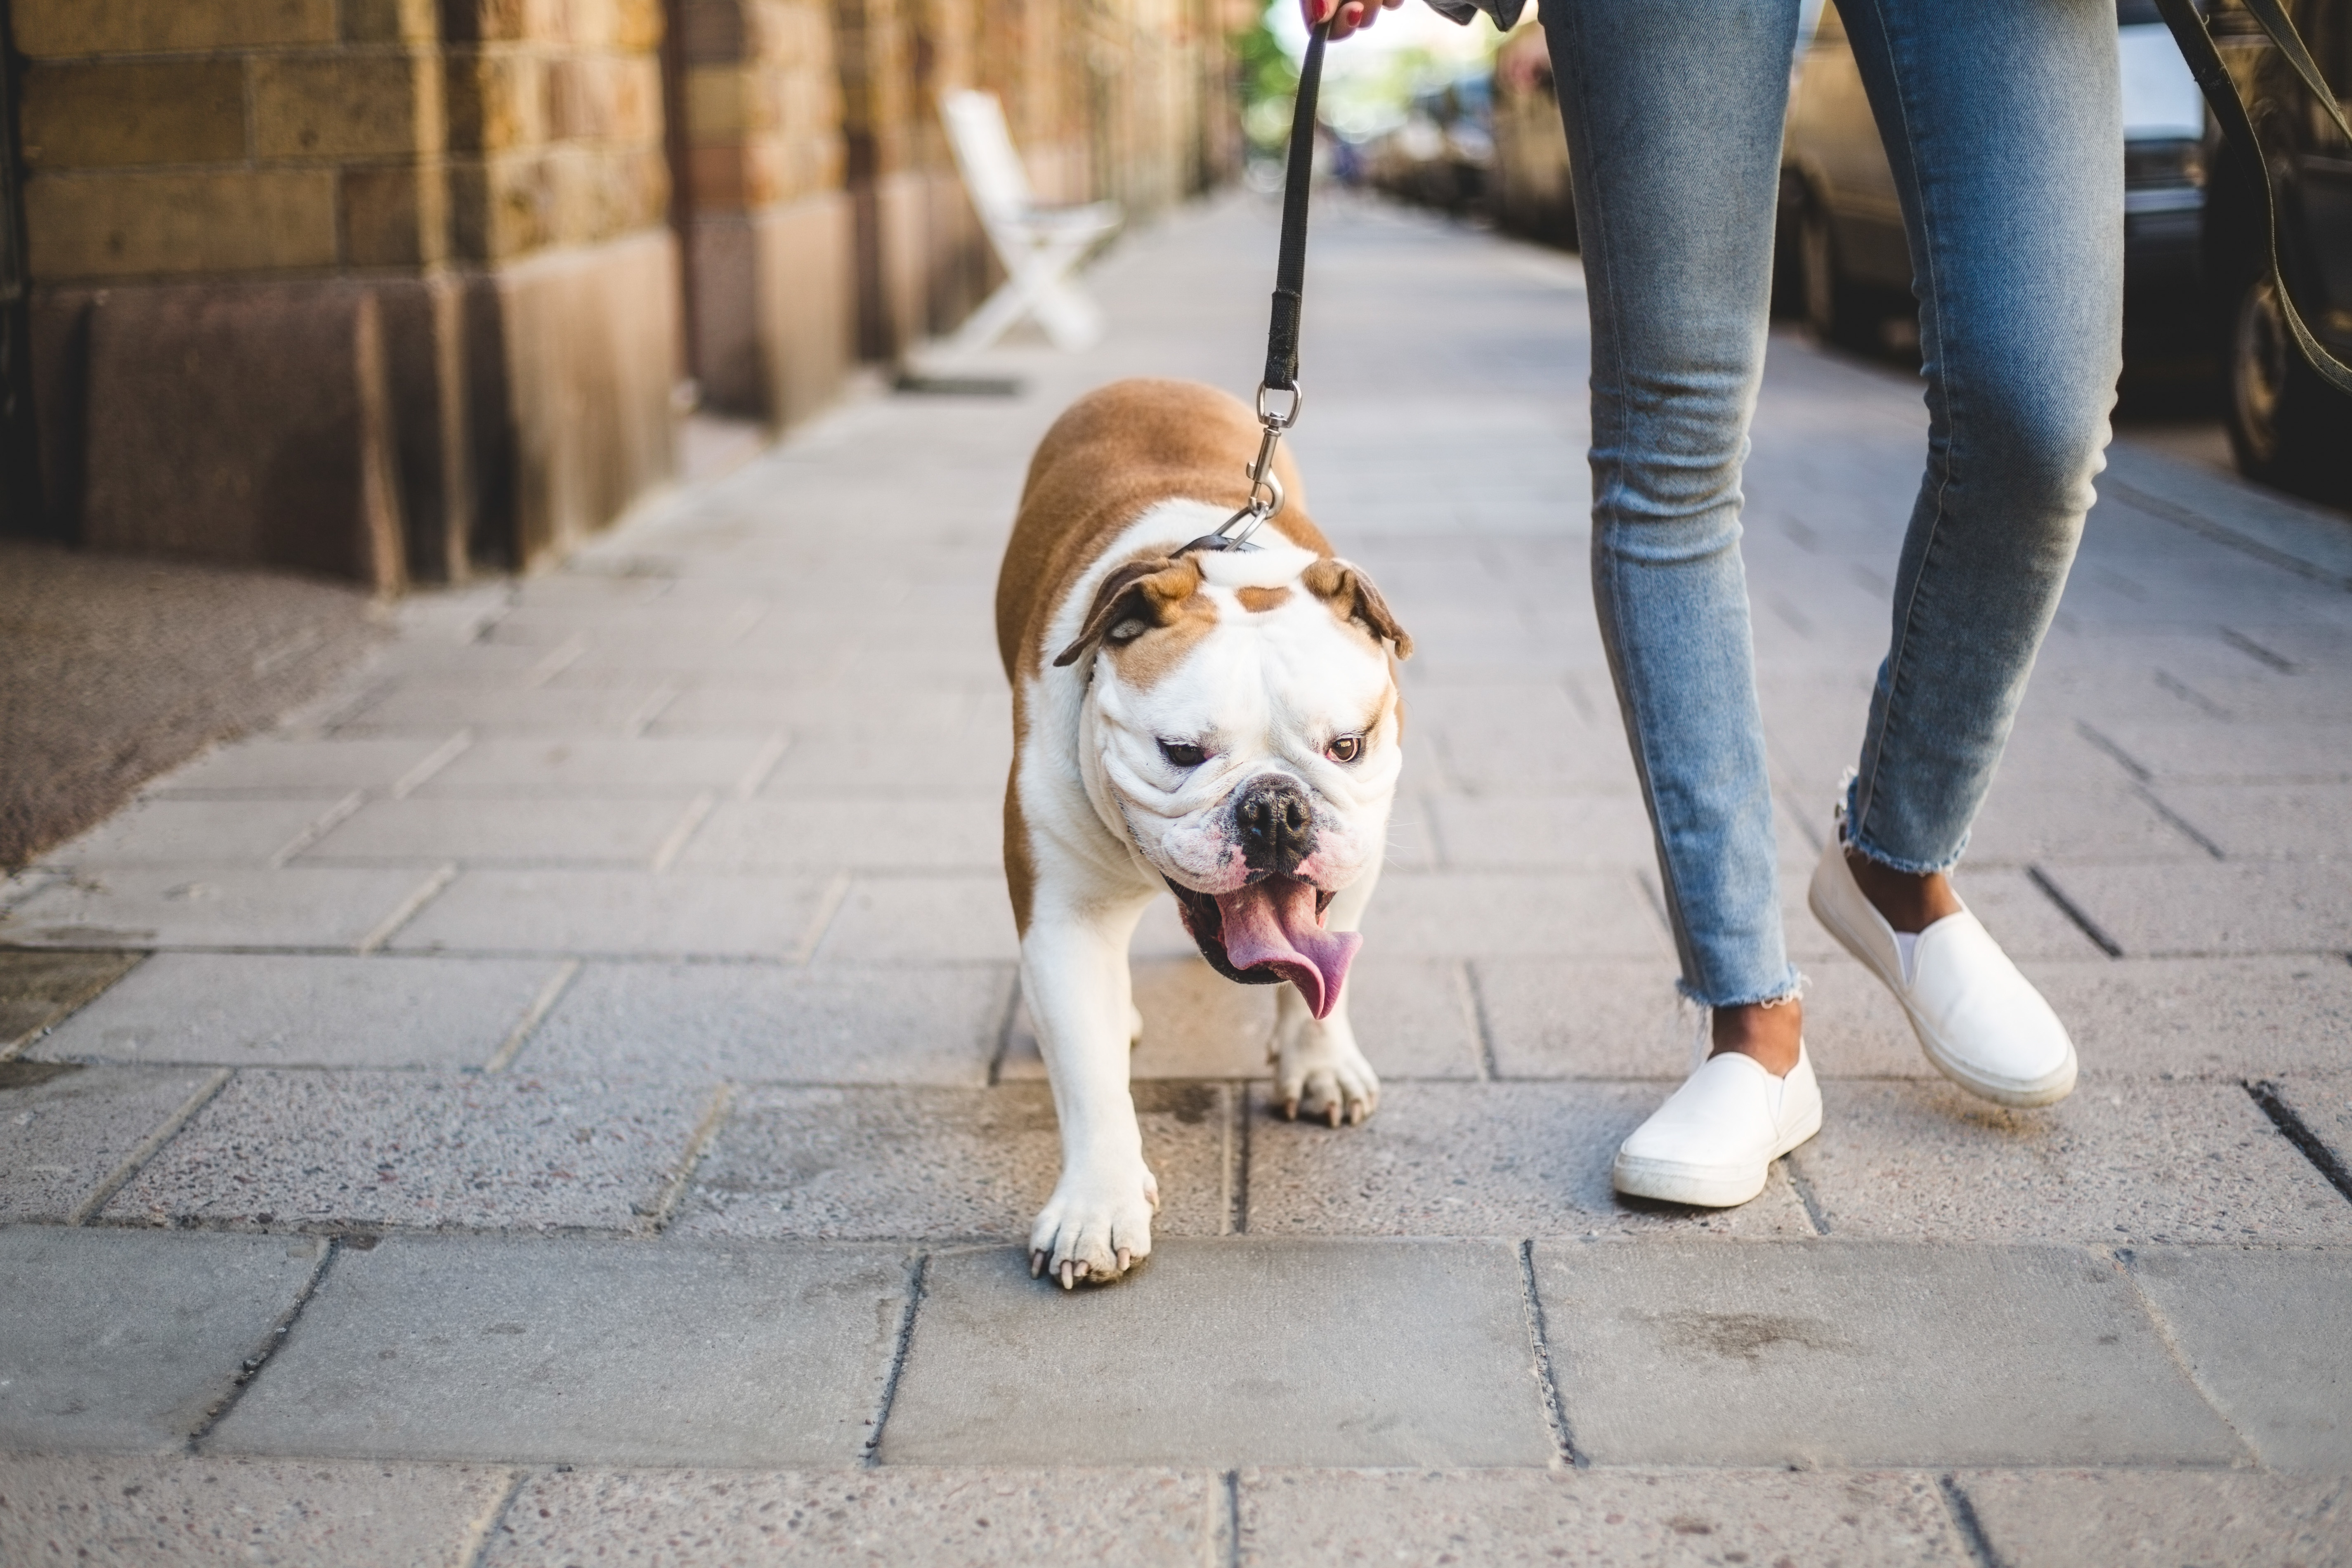 How to choose a dog walker you can trust